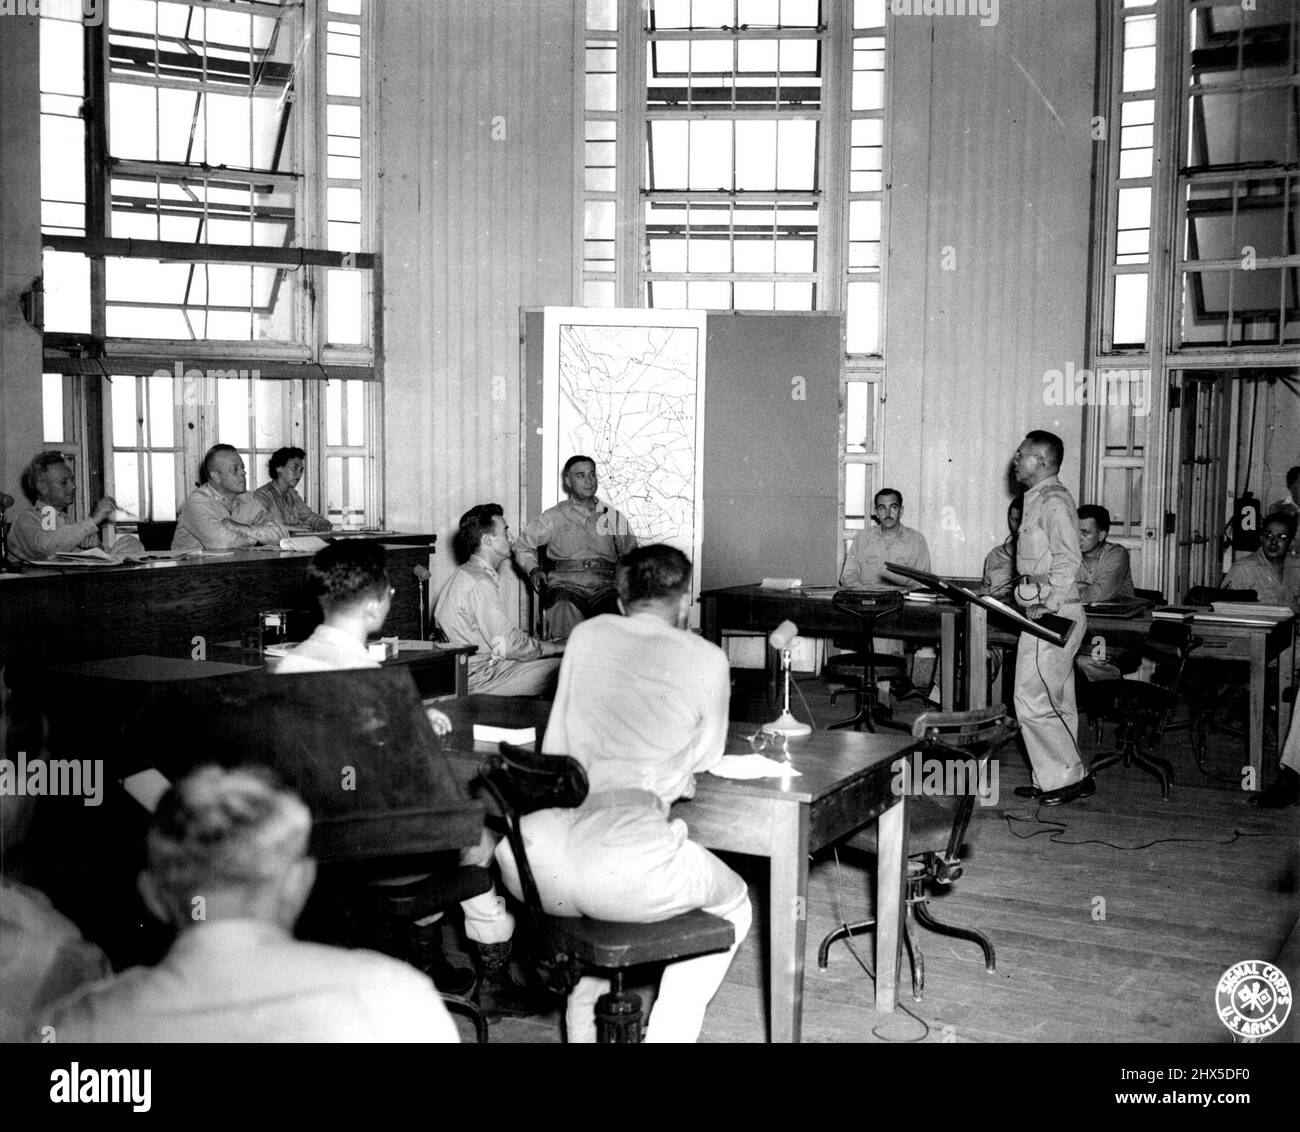 Gen. Valdez witness against Yamashita - Maj. Gen. Basilio J. Valdesz, chief of staff of the Philippine Army, in the witness chair as he gave testimony against Gen. Tomoyuki Yamashita. On trial in Manila as a war criminal. Maj. Glicerio opinion of the prosecution is questioning the witness. October 30, 1945. (Photo by U.S. Army Signal Corps Photo). Stock Photo